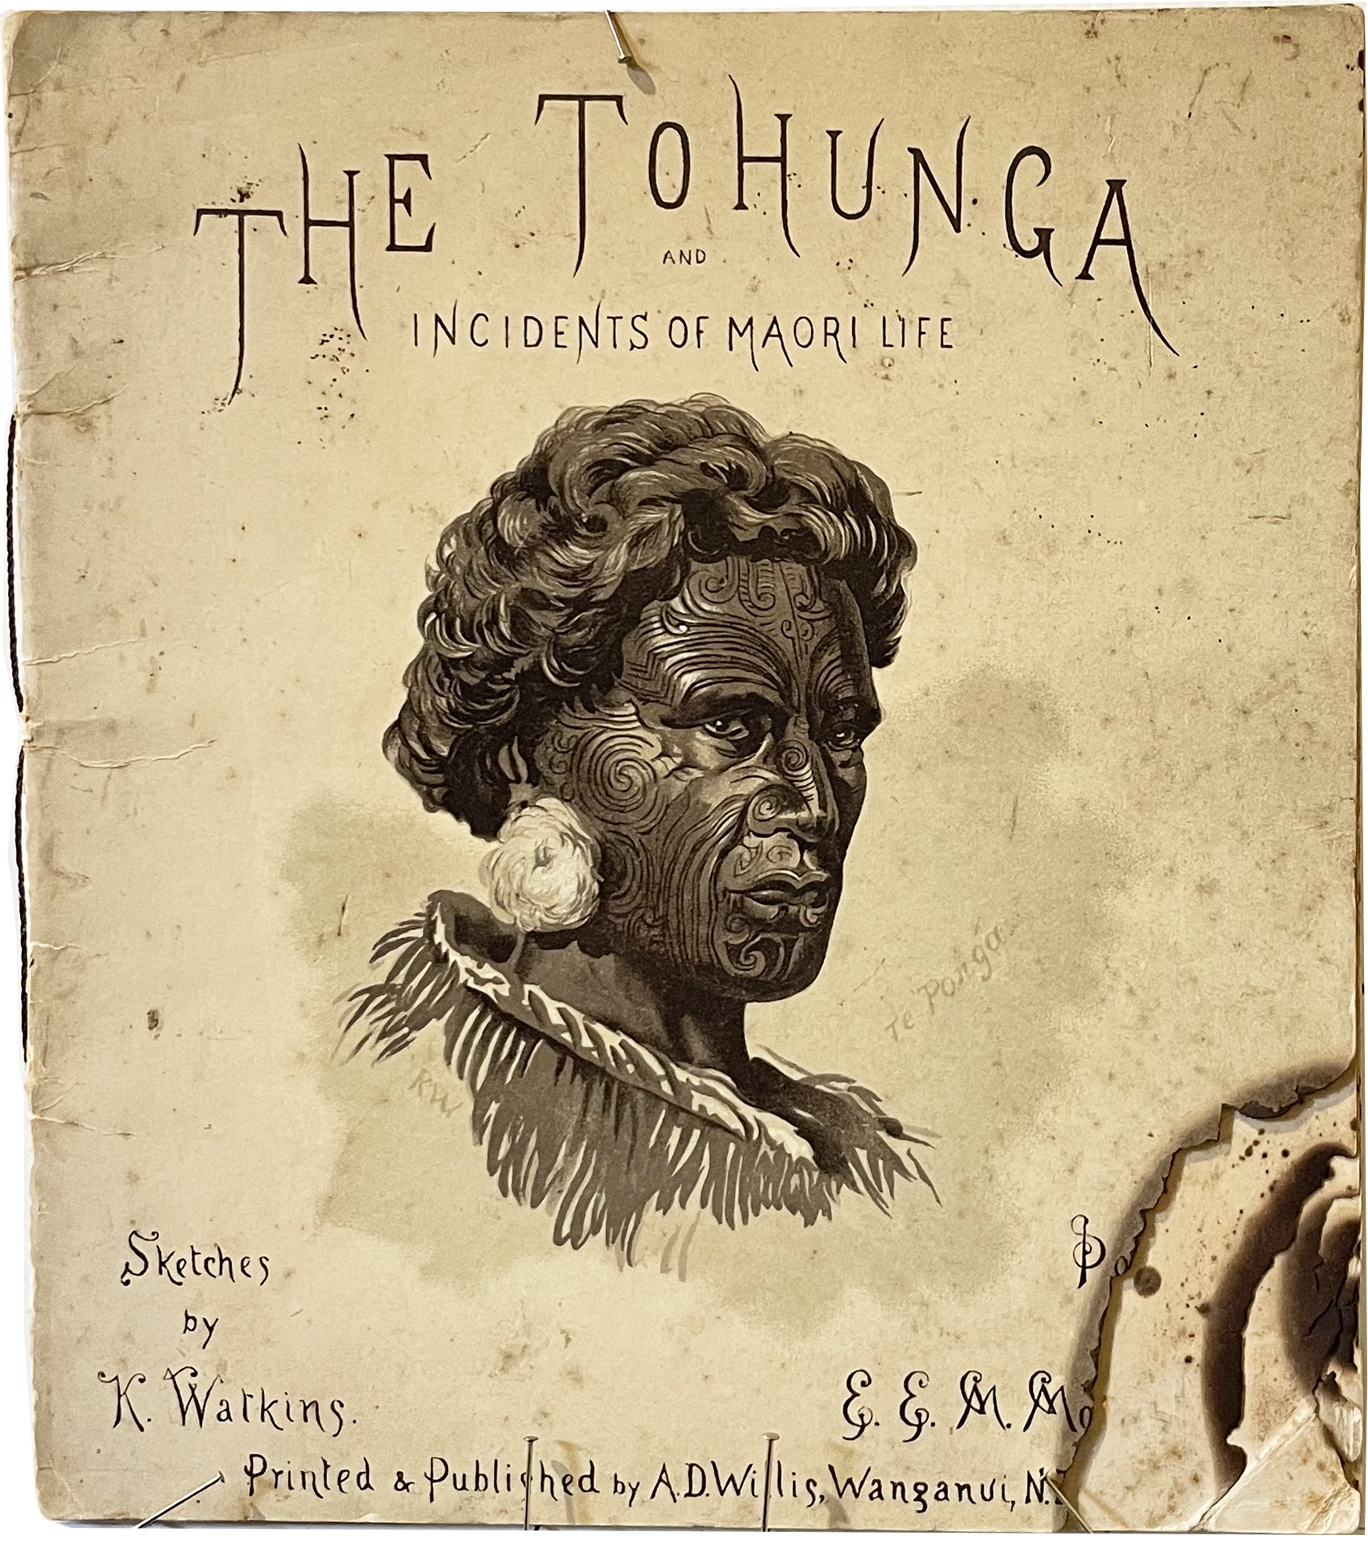 LINK to The Tohunga booklet pages.